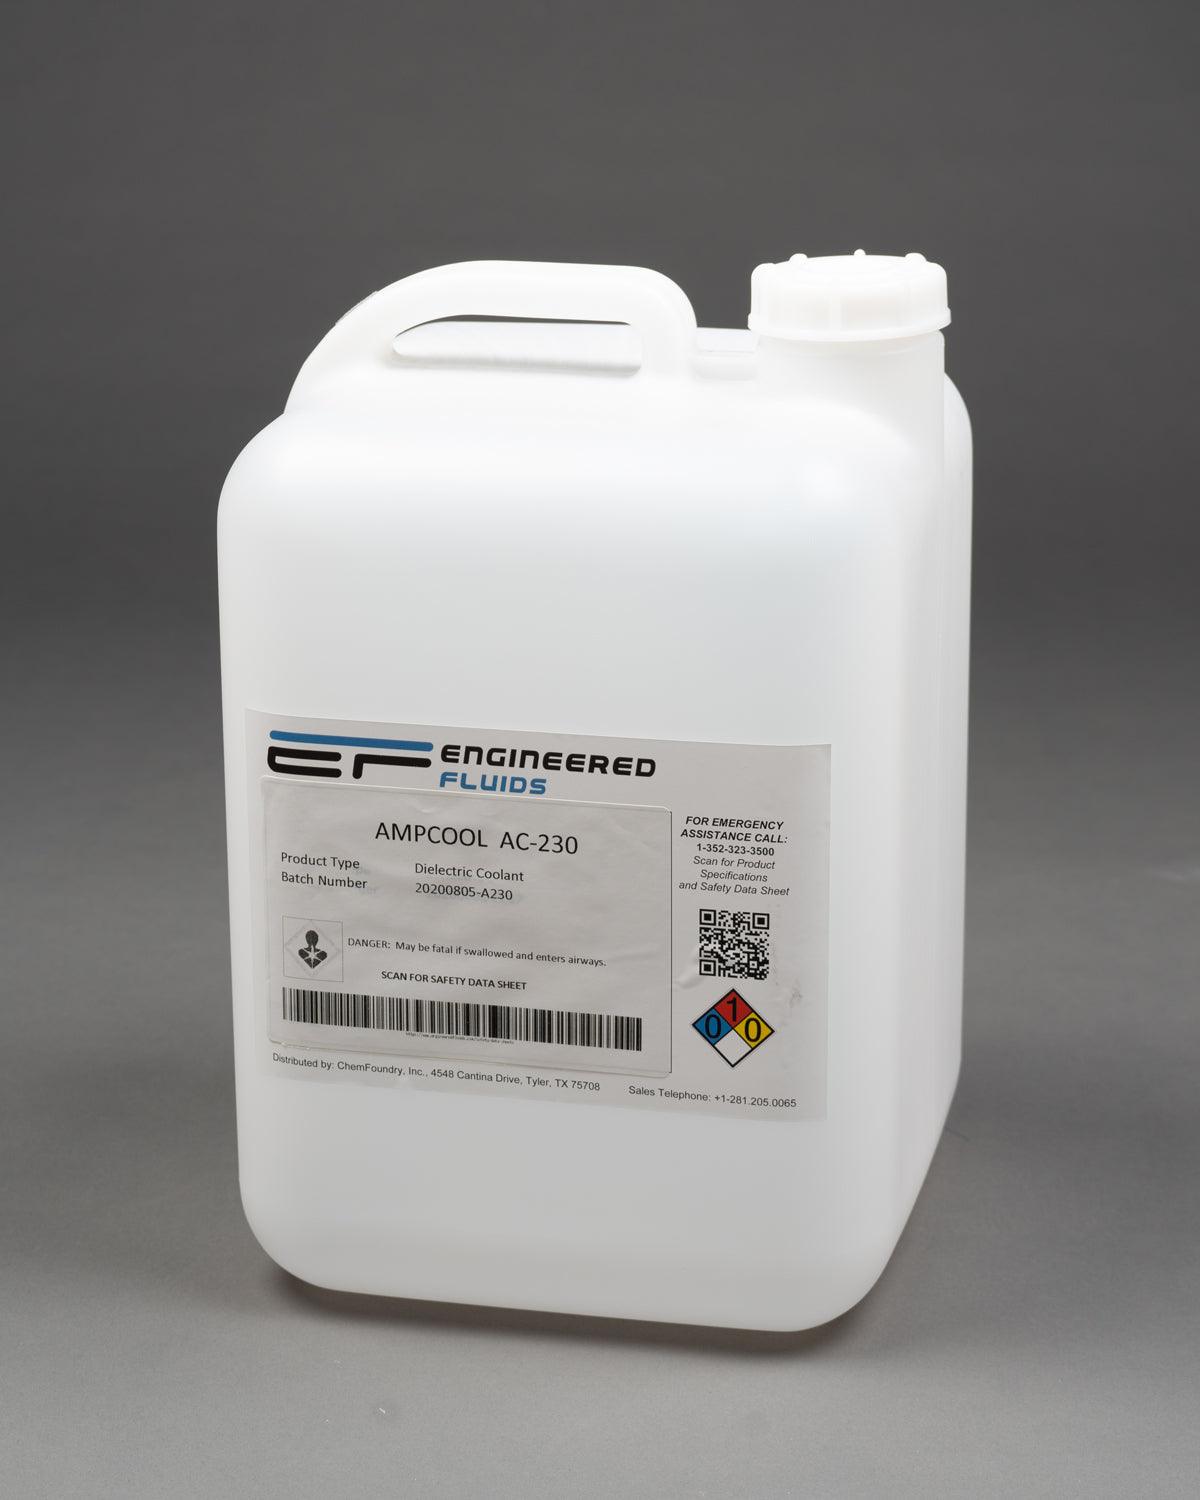 AmpCool® AC-230 Dielectric Coolant & Lubricant - Engineered Fluids